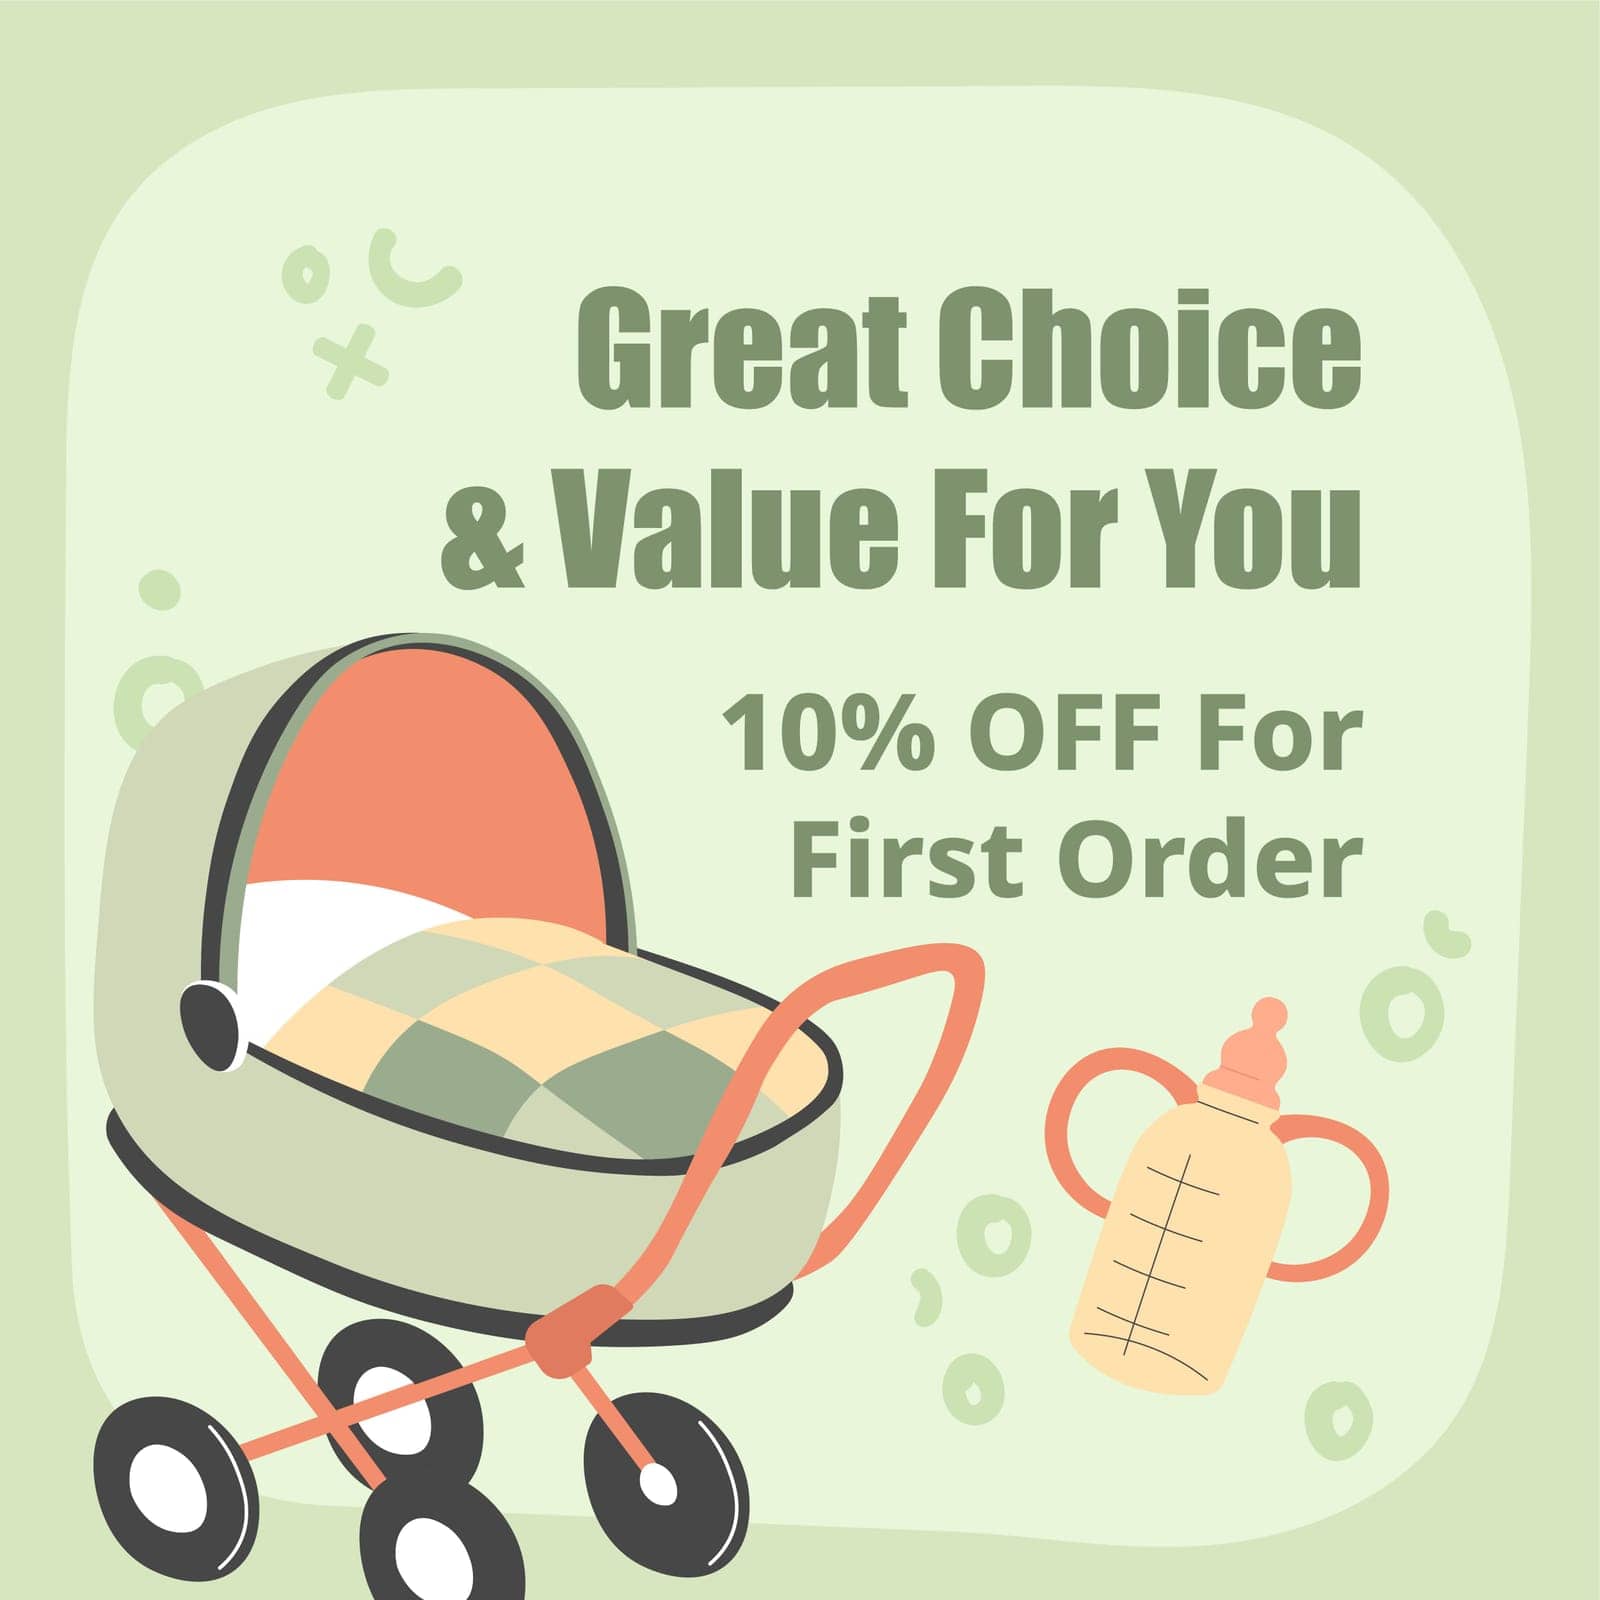 Baby clothes and products in shop or store with ten percent off for your first order. Great choice and value. Children and infants bottles with handles, crib and pram banner. Vector in flat style